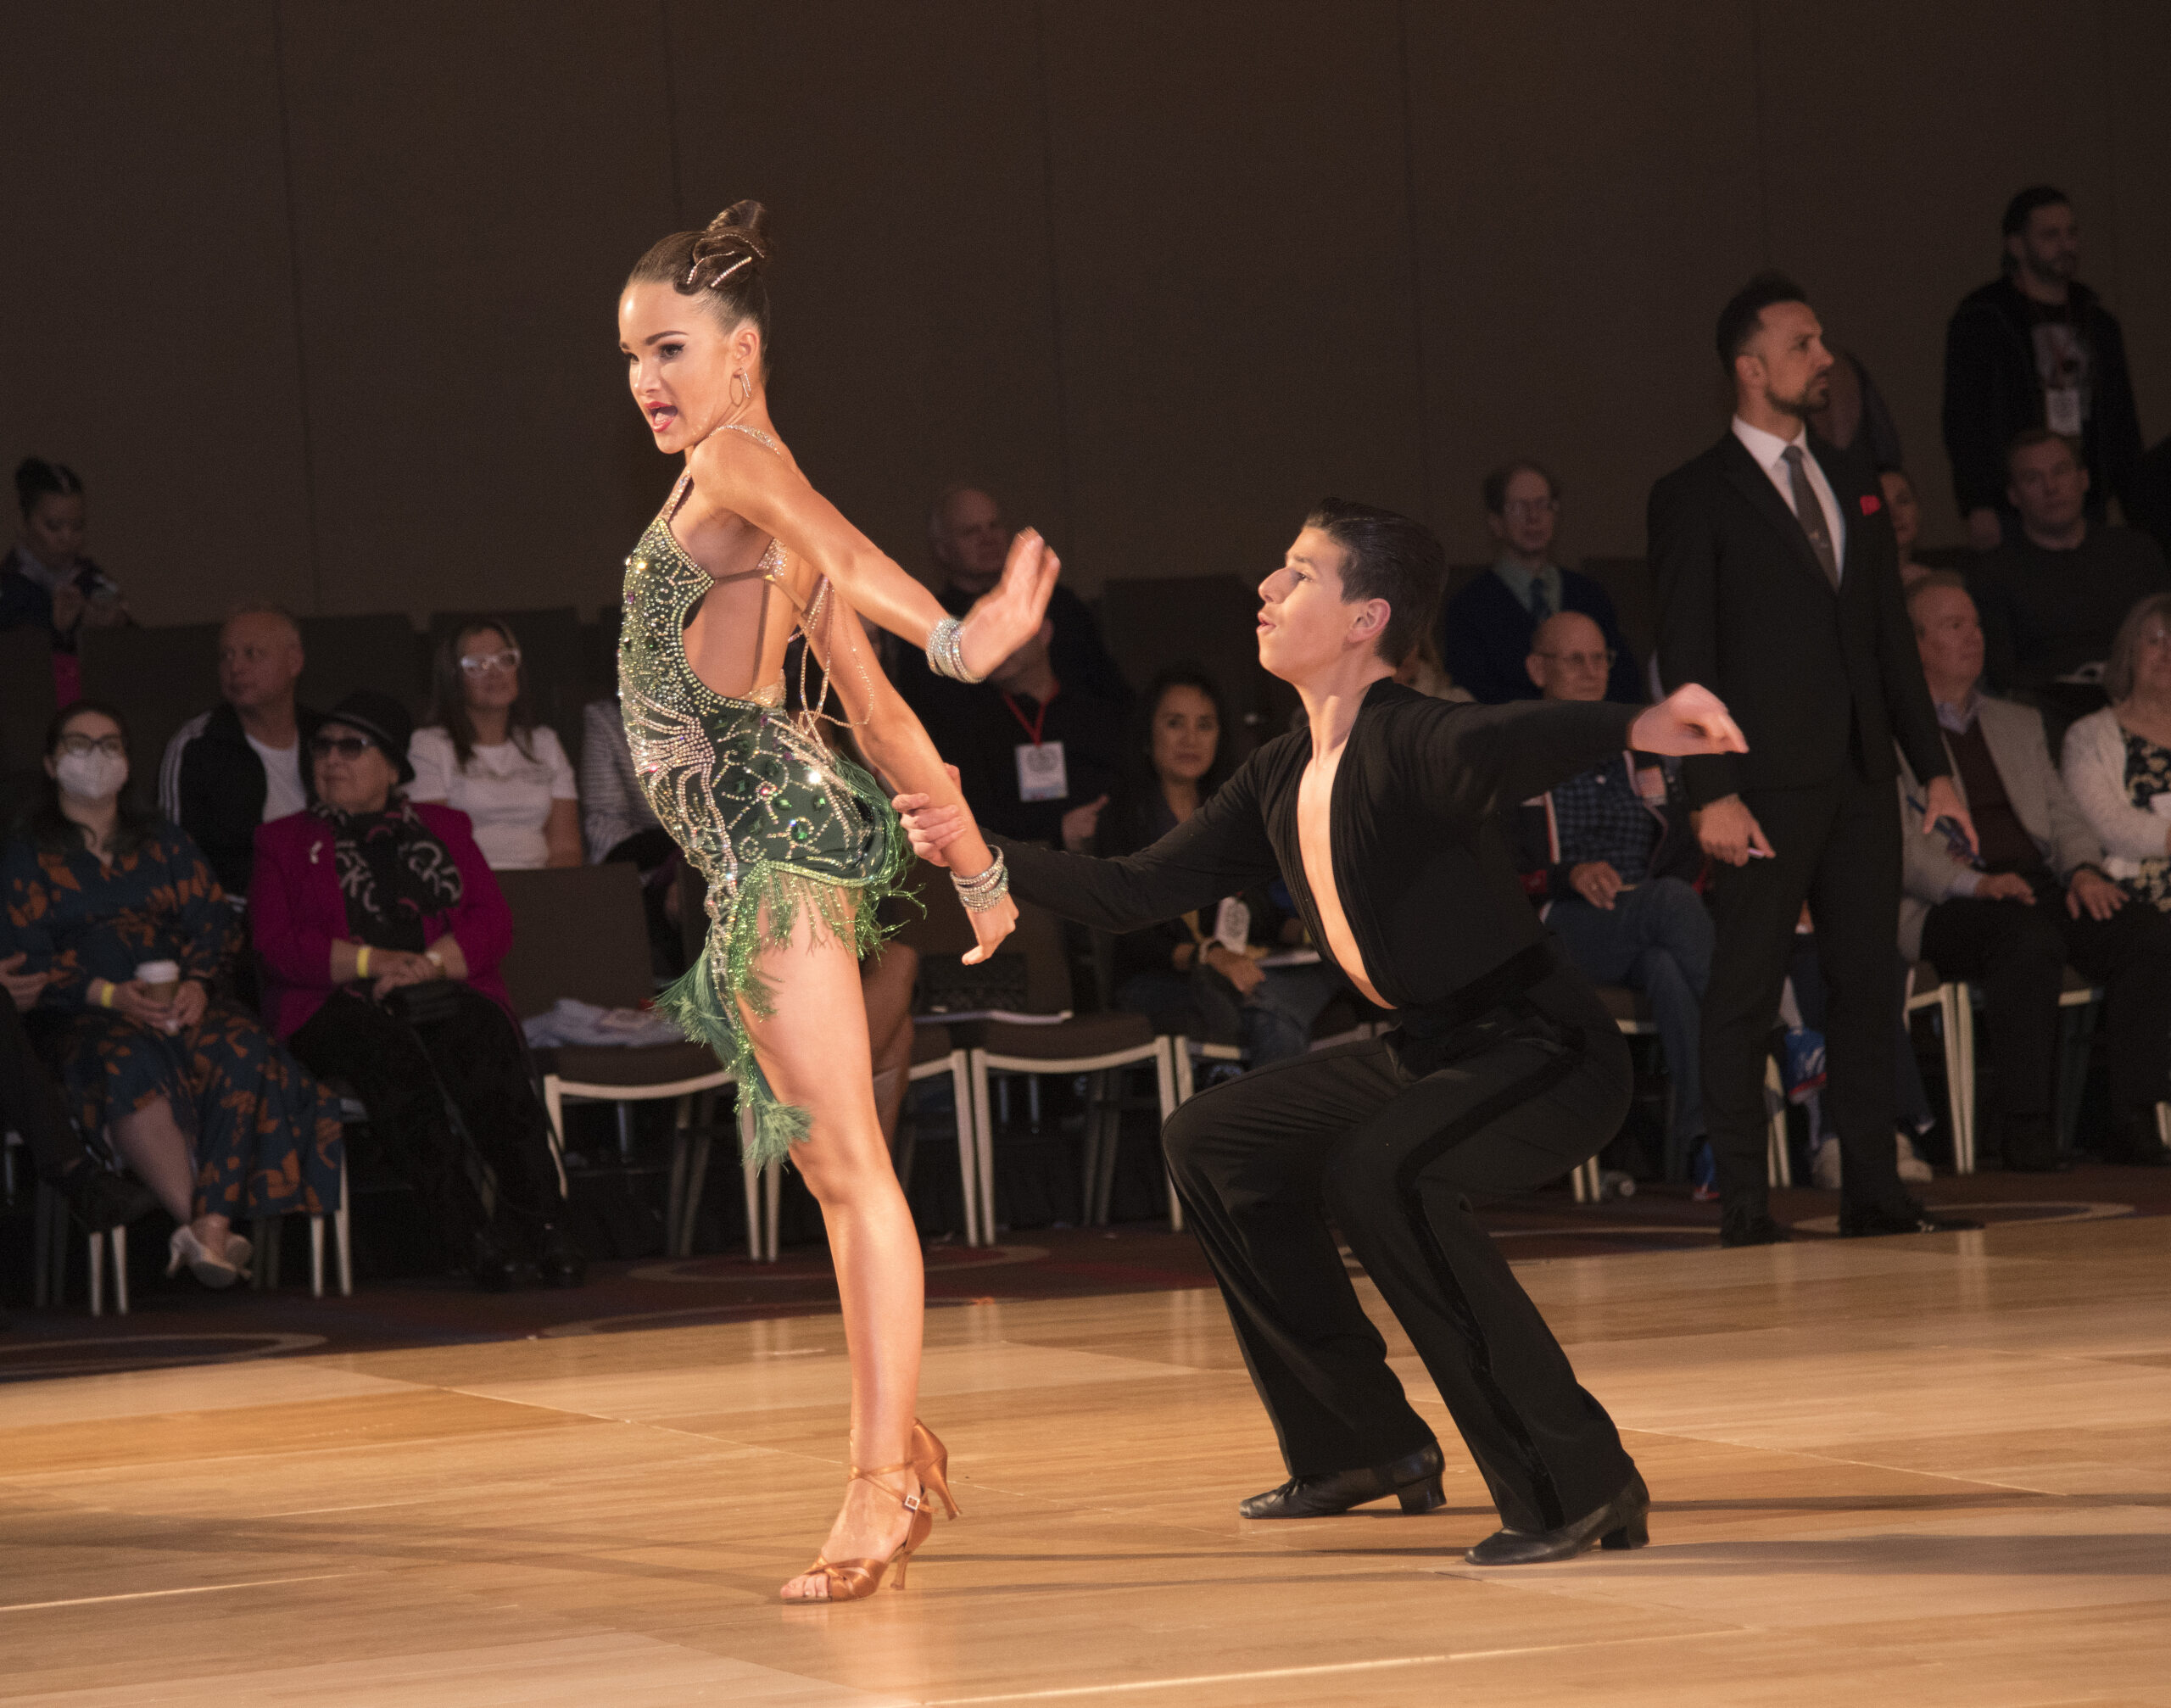 Angelina Zelenova and David Moiseyev competed in Junior 1 Championship Latin and Standard and won both categories.Photo by Carson Zullinger.